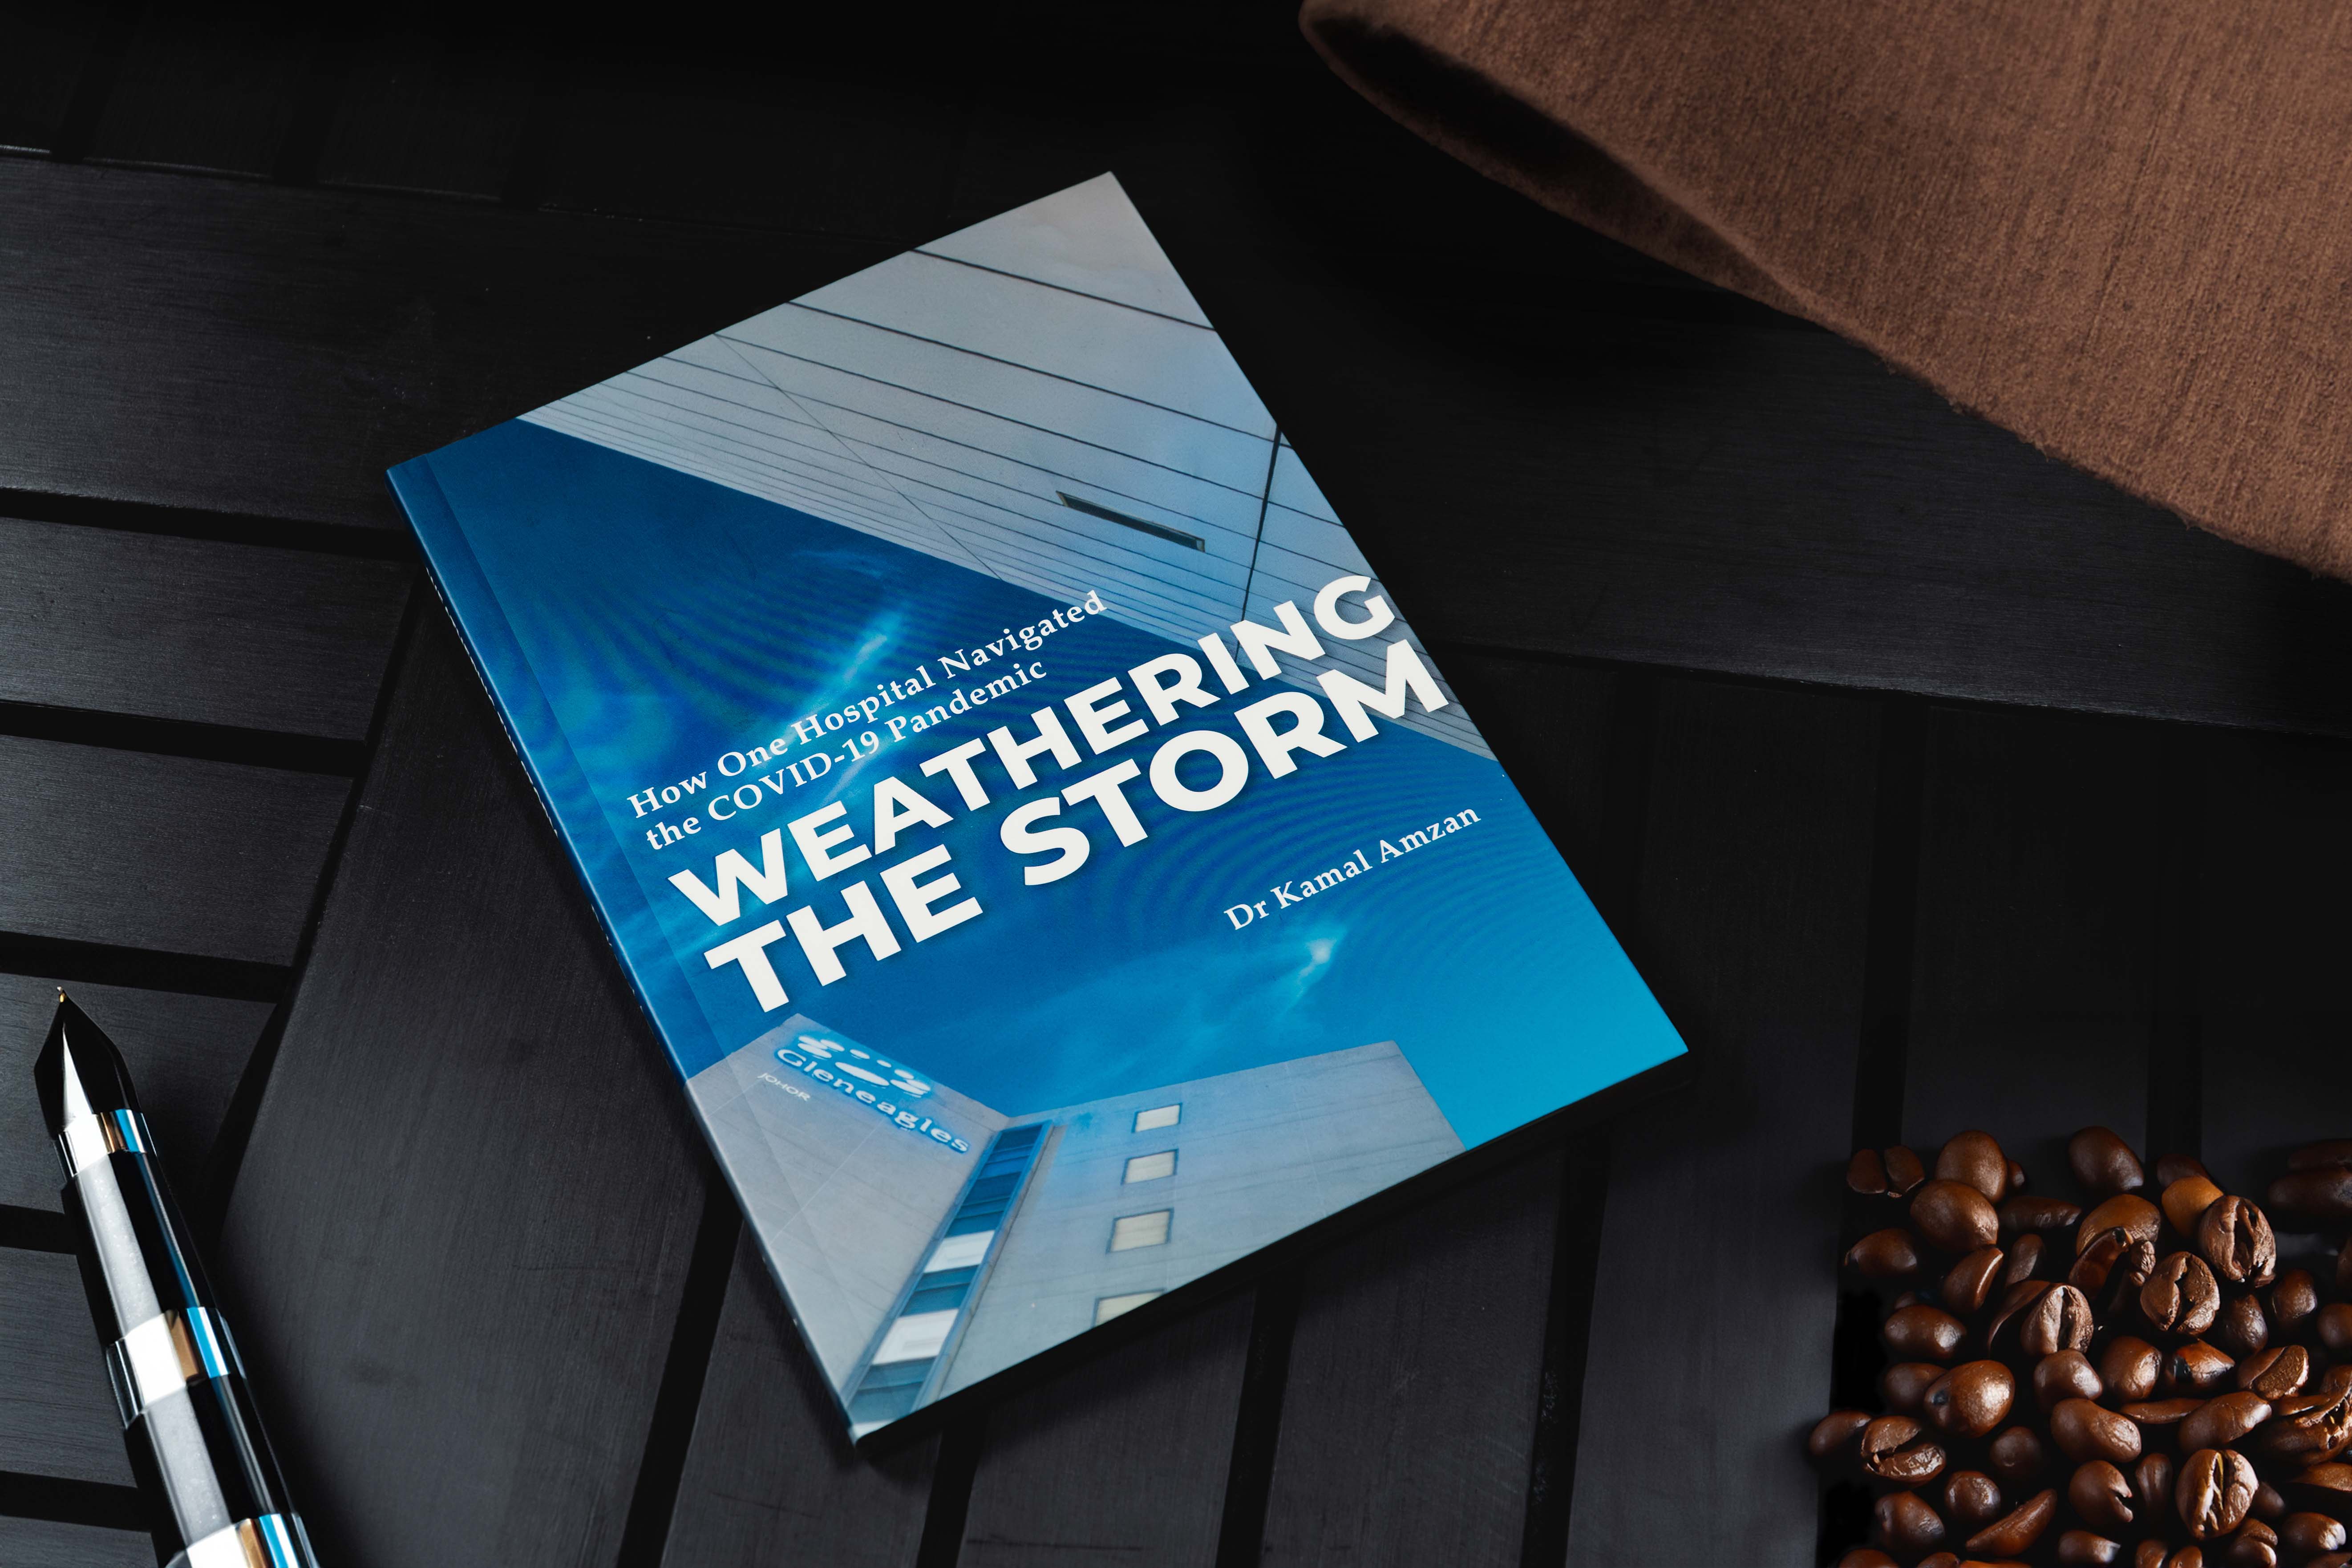 Weathering the storm chronicles the Covid-19 pandemic and the lessons learnt from it, while acting as a comprehensive guide on how to handle future pandemics, available now at MPH Bookstores